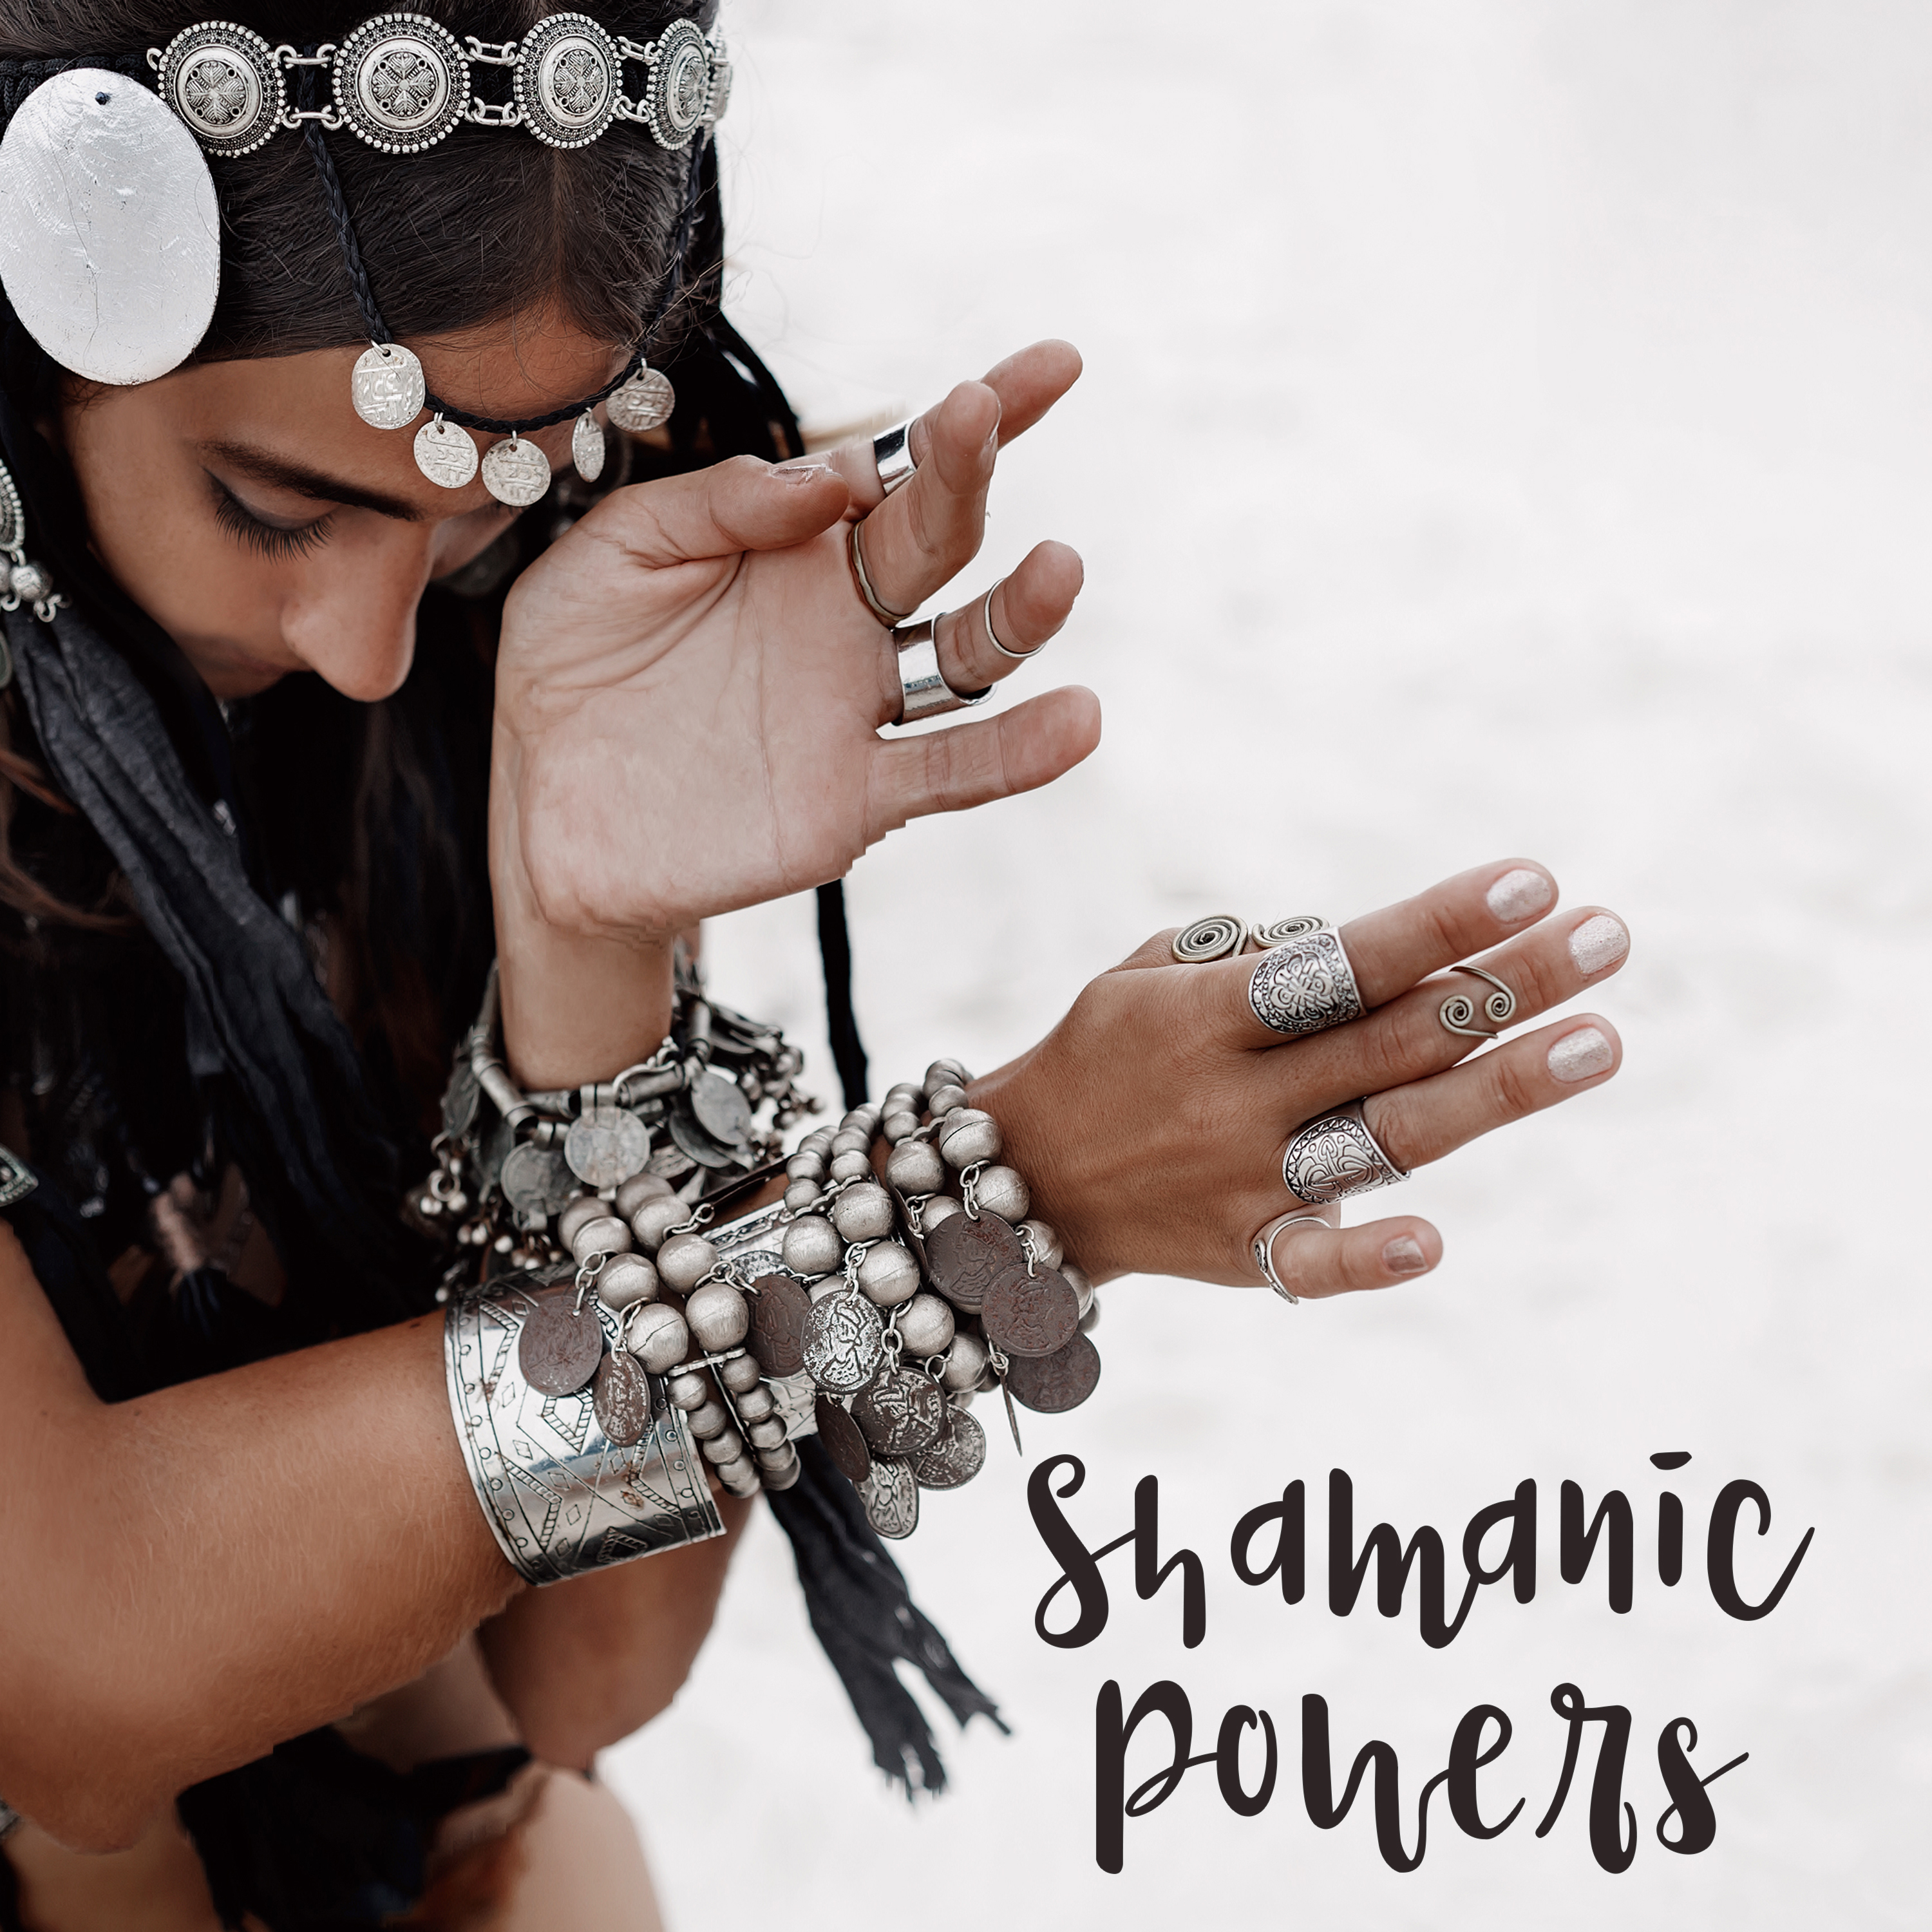 Shamanic Powers - Spiritual Evocation, Soul Healing, State of Ecstasy, Clear Negative Energy, Consciousness Expansion